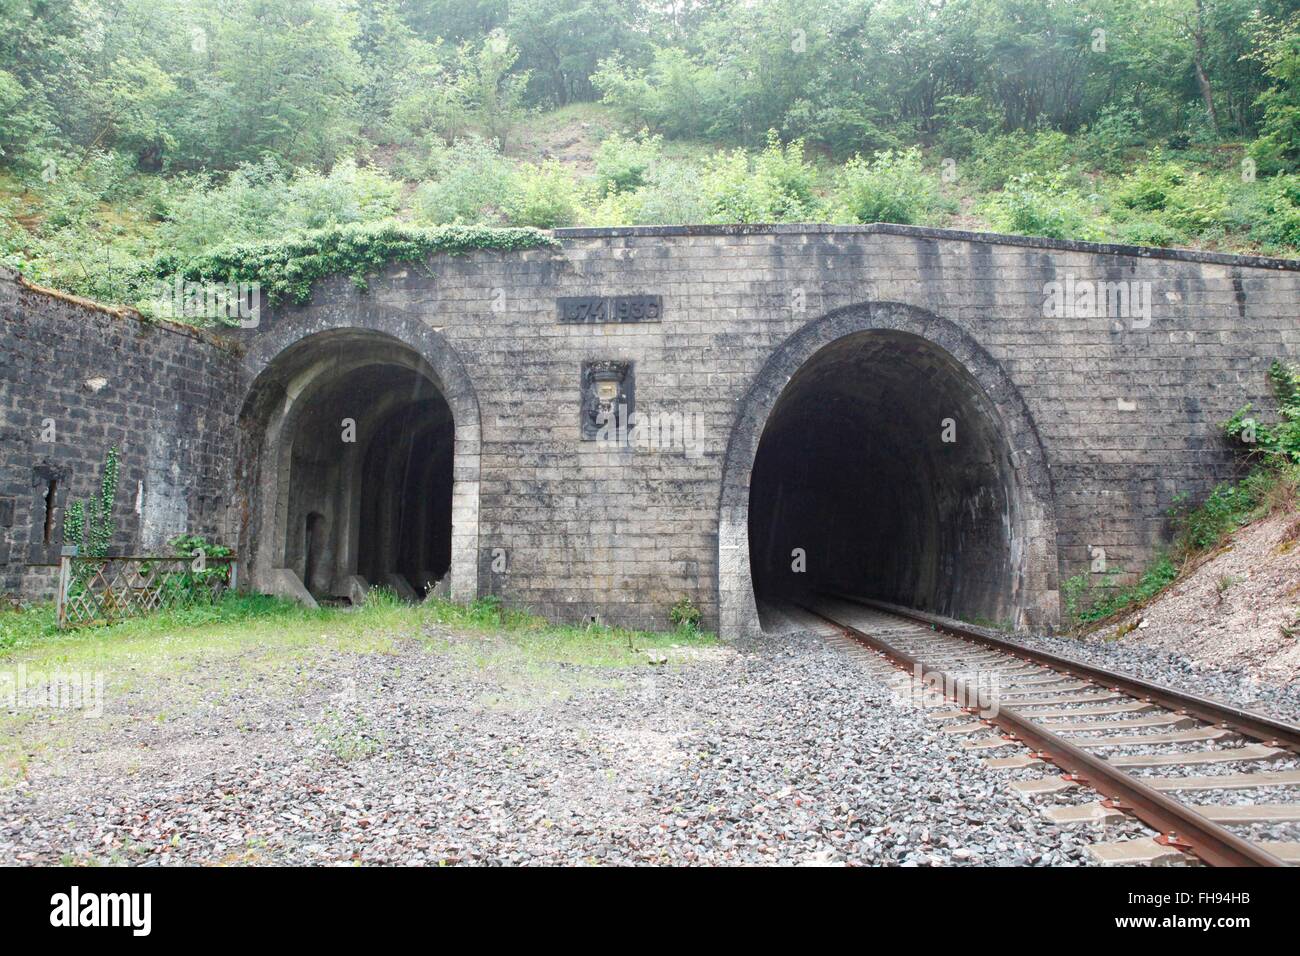 The railway tunnel of Tavannes (left tube), which served as a shelter during the battles of Verdun. The right tube was built after the Second World War. Battlefield of Verdun. June 2015. Stock Photo